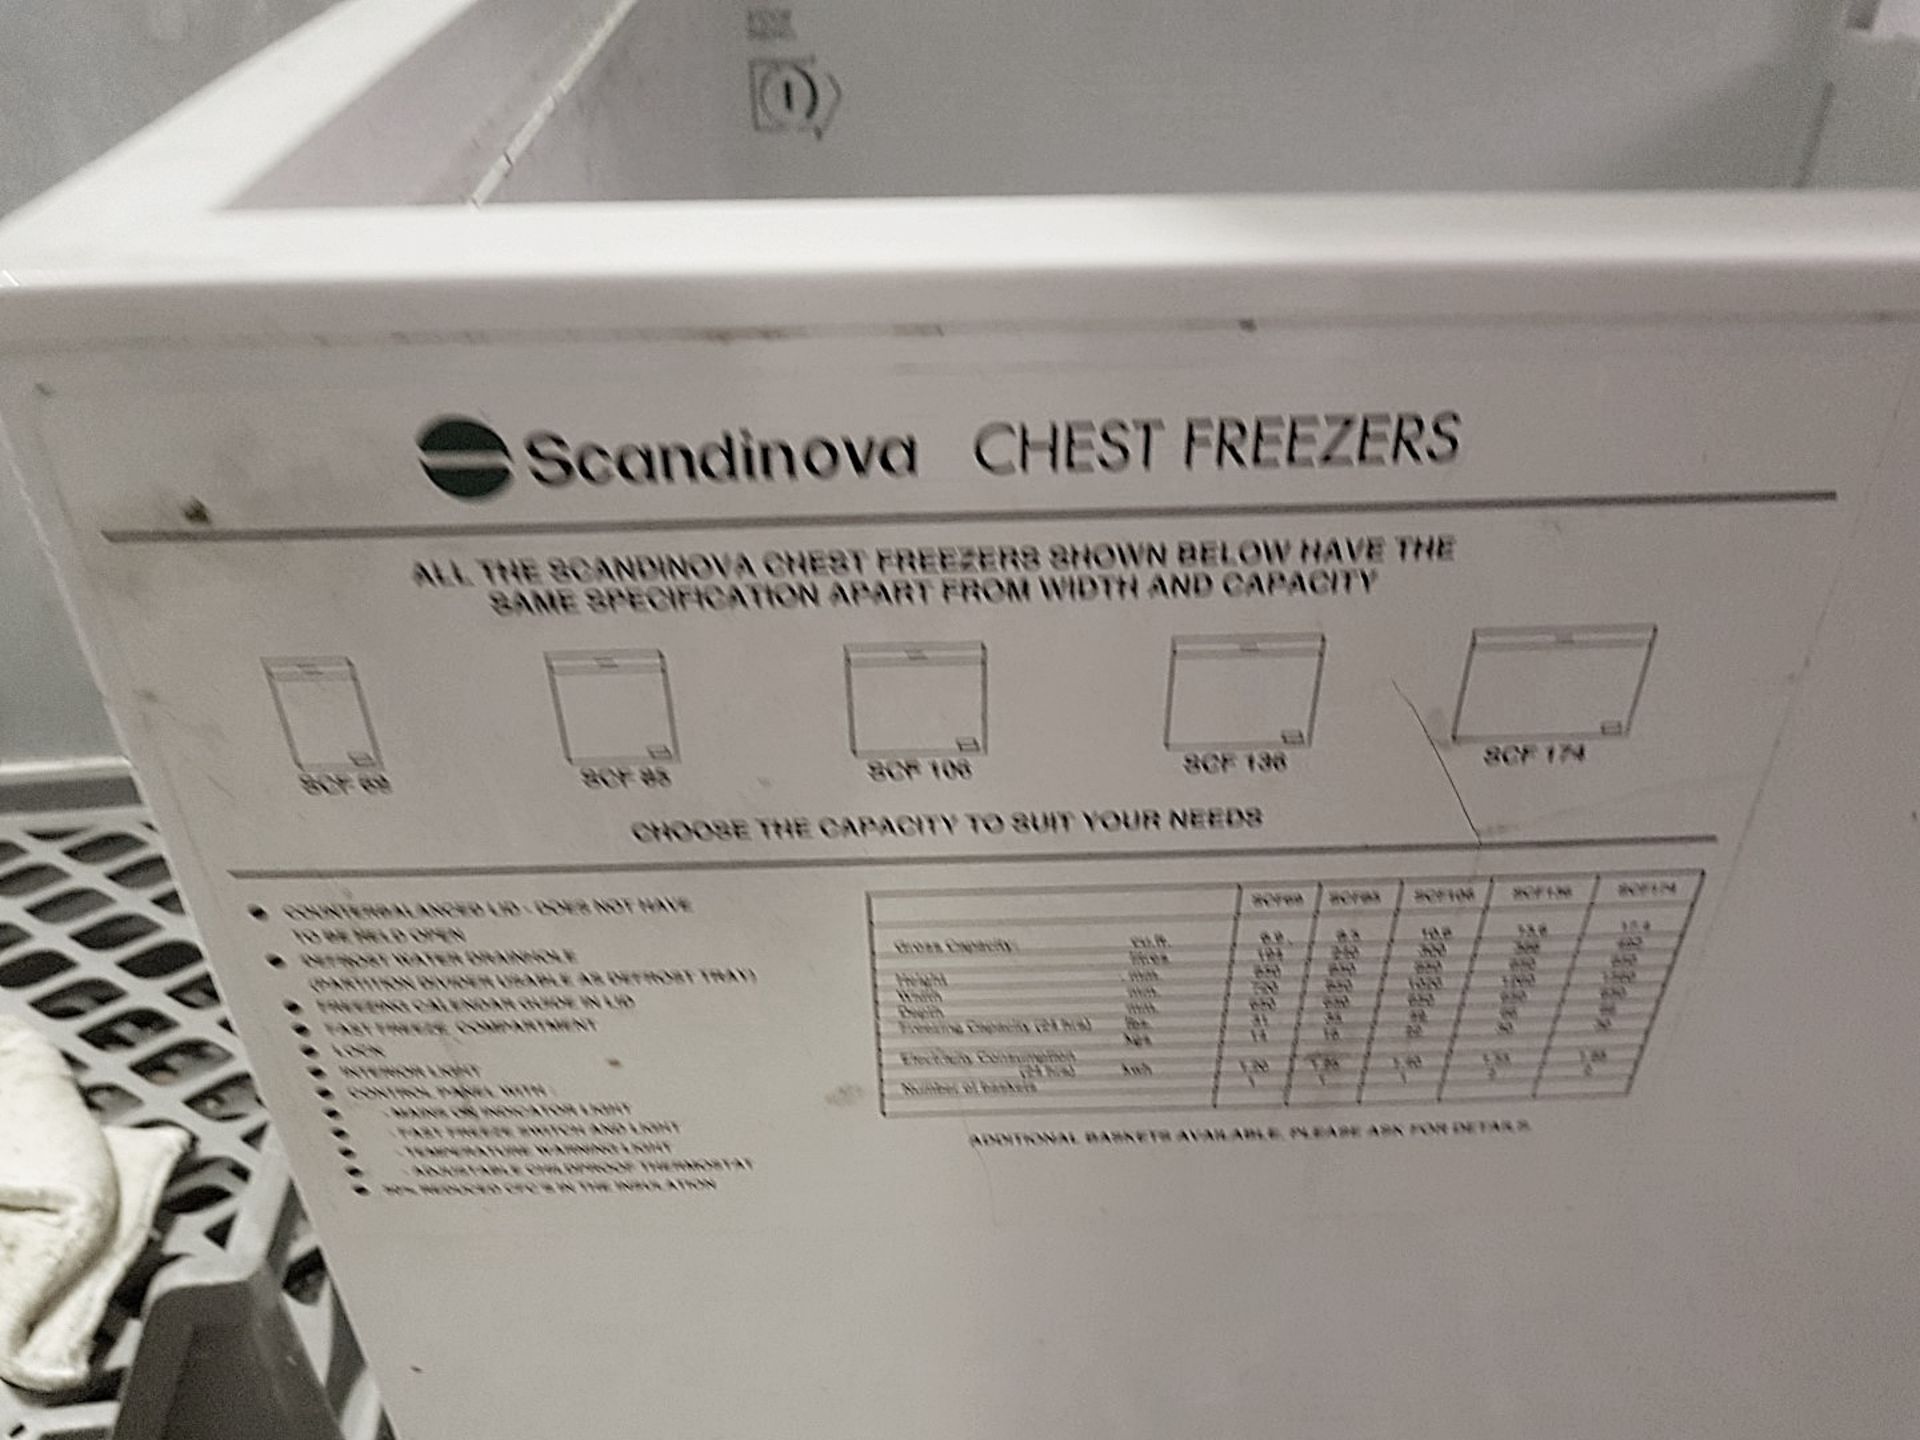 1 x SCANDINOVA Small Chest Freezer - Dimensions: 85.5 x 60.5 x H83cm- Ref: SIN014 - CL278 - From A - Image 2 of 3